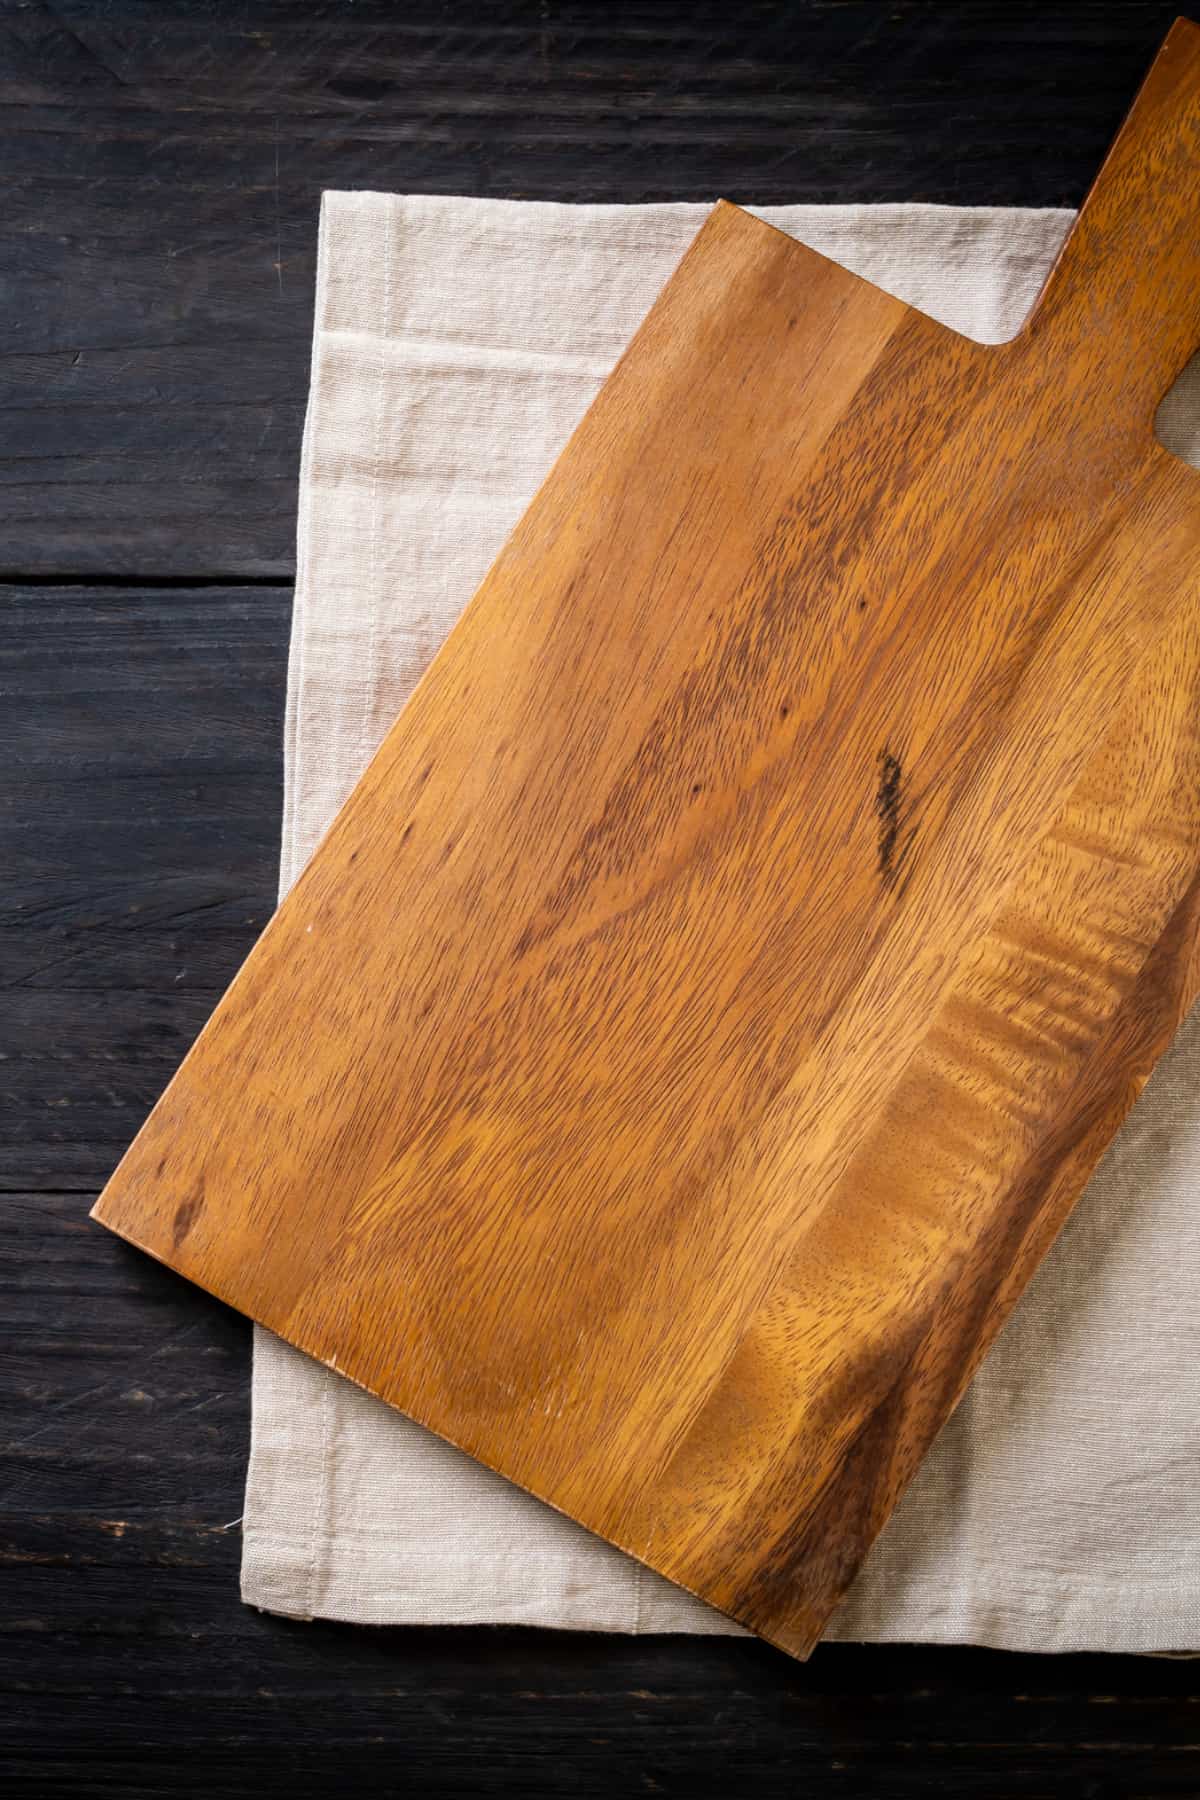 Wooden charcuterie board on a linen napkin on a dark wood table